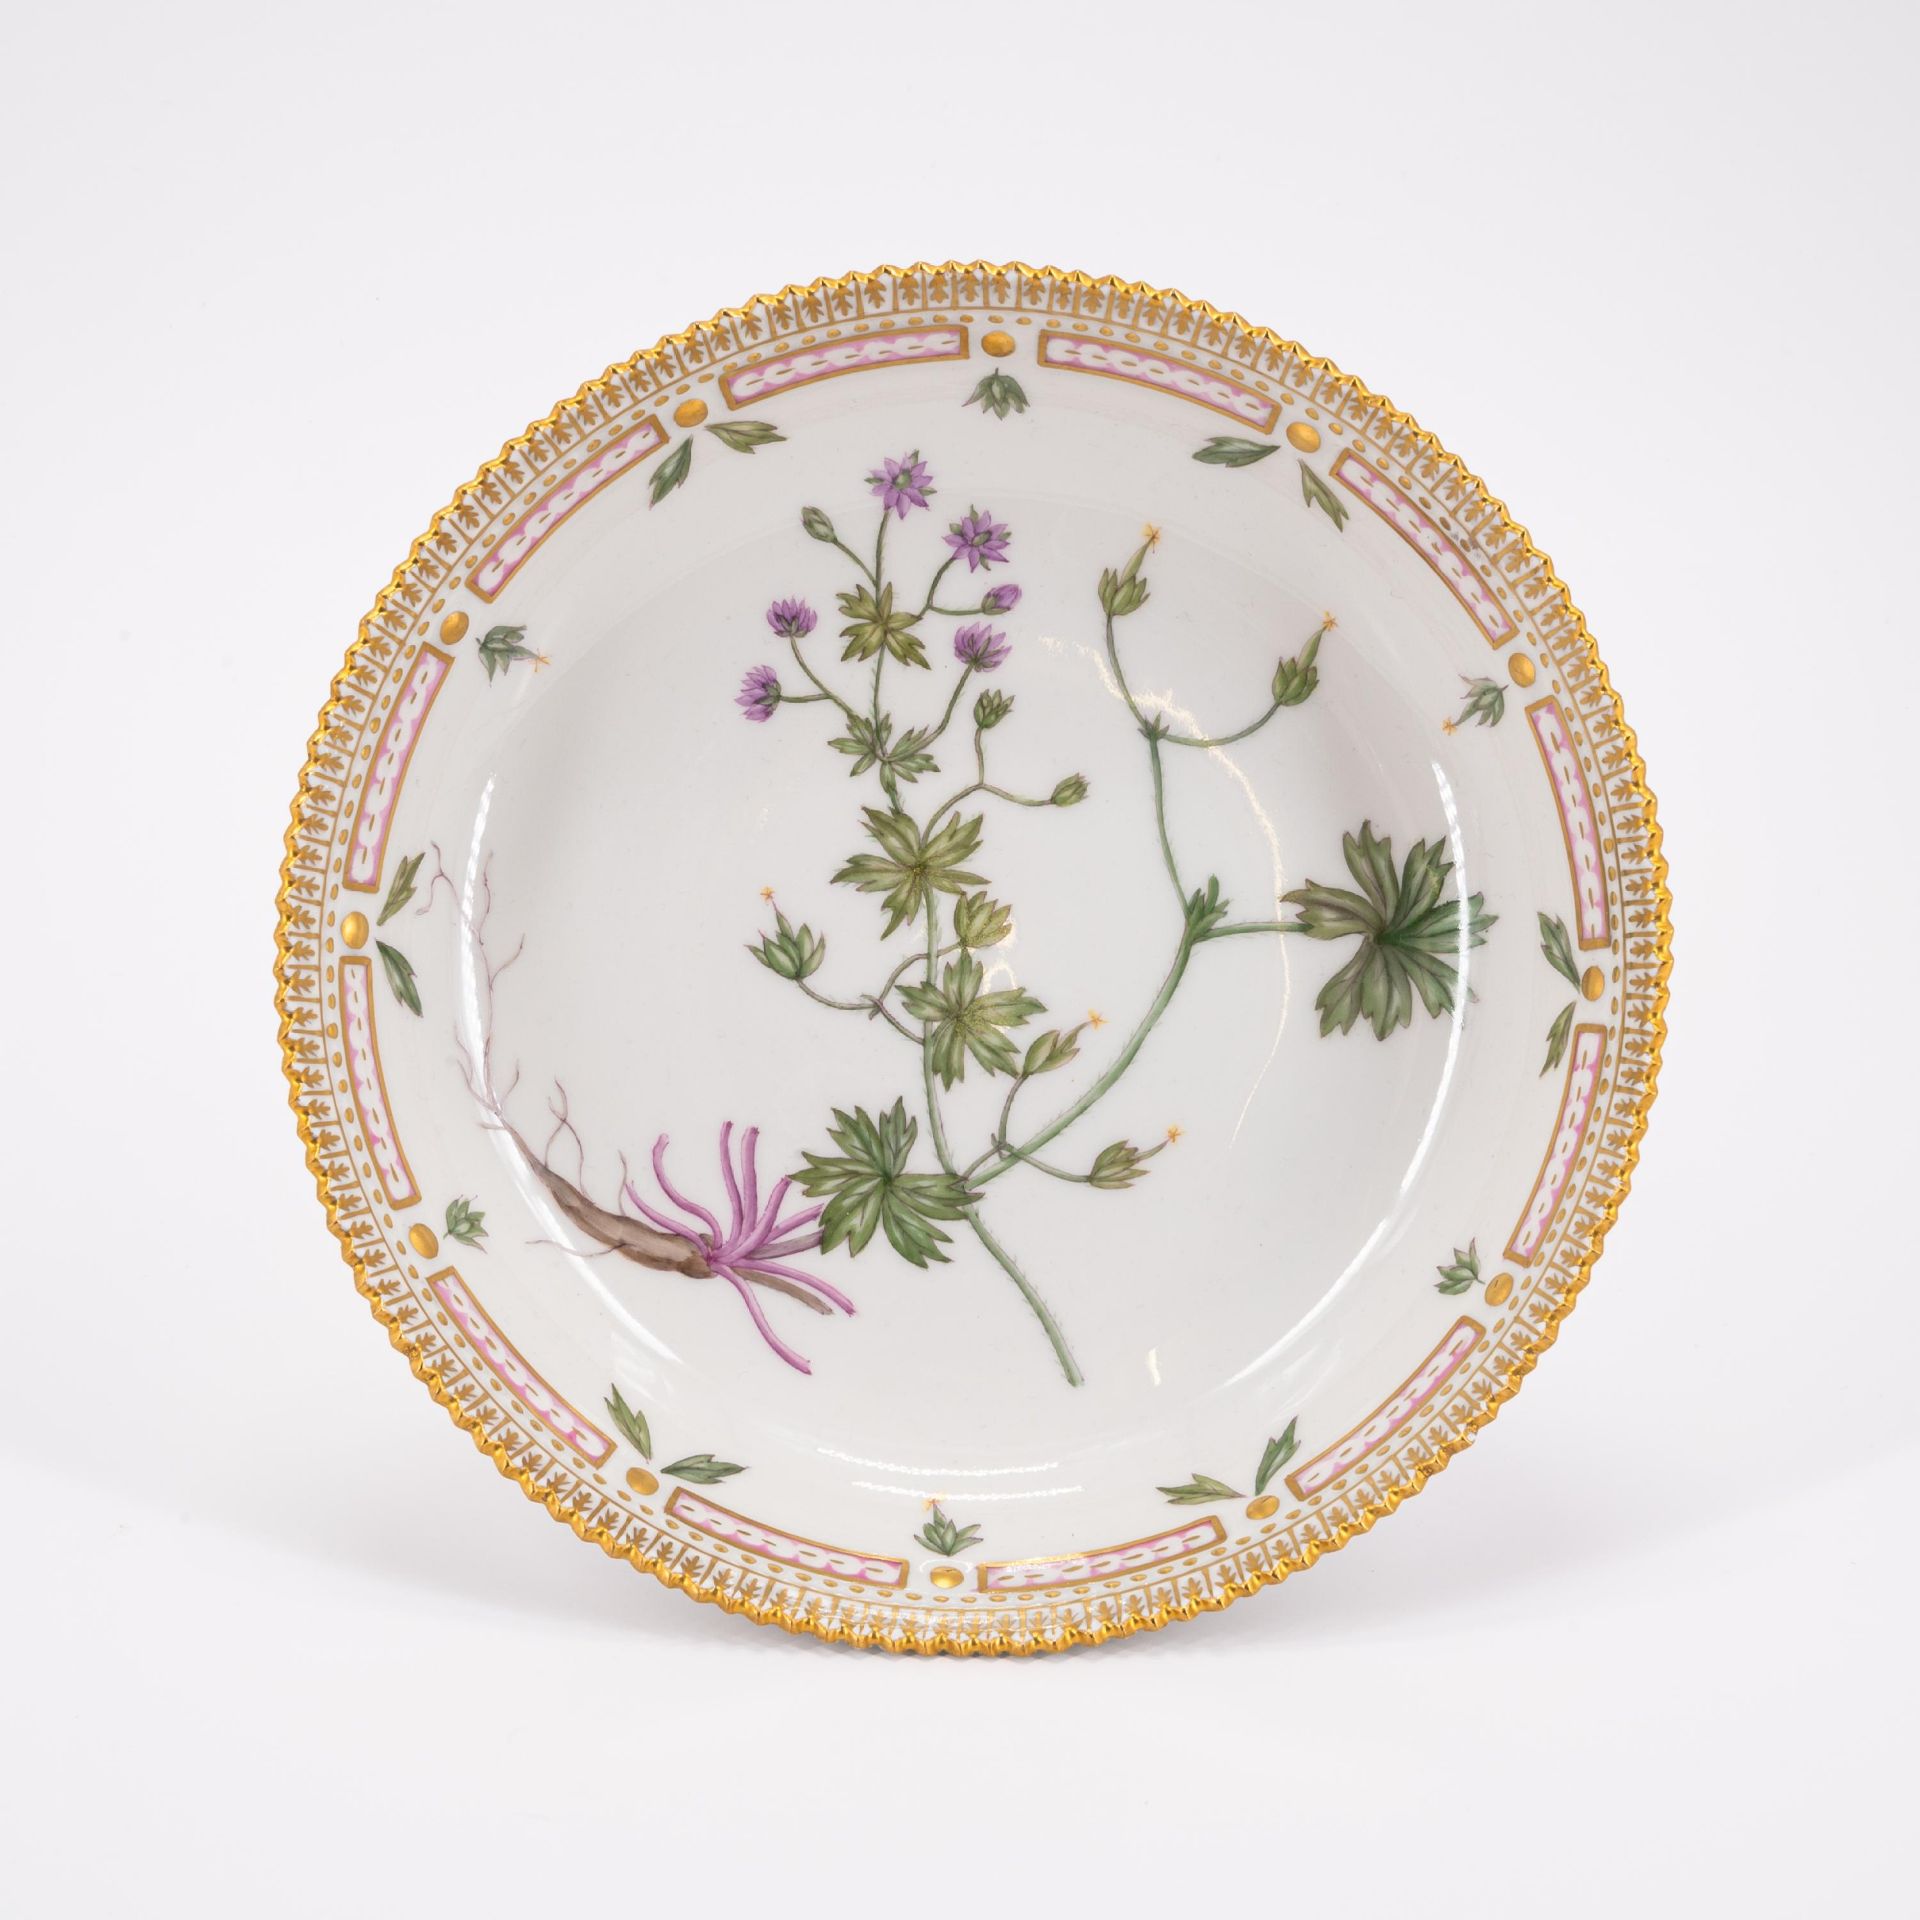 Royal Copenhagen: 95 PIECES FROM A 'FLORA DANICA' DINING SERVICE - Image 11 of 26